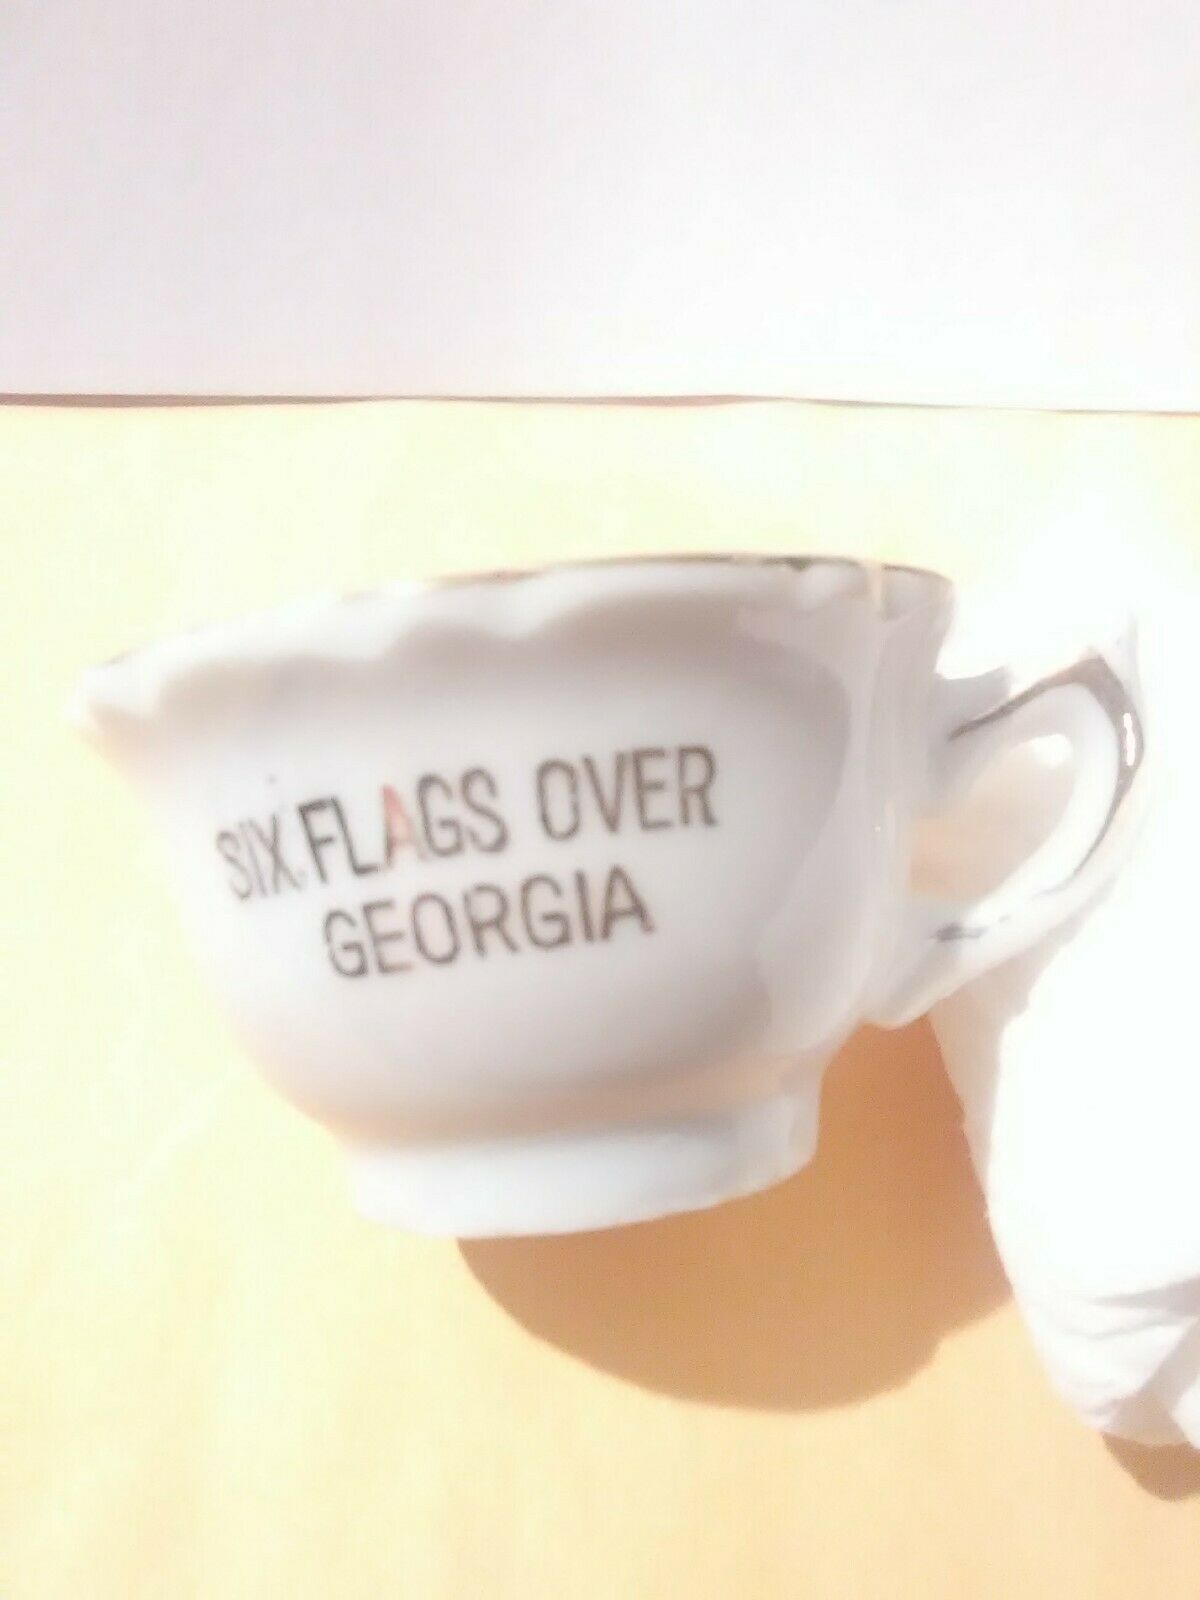 Six Flags Over Georgia Tiny Advertising Coffee Cup Great For Any Old Collection!